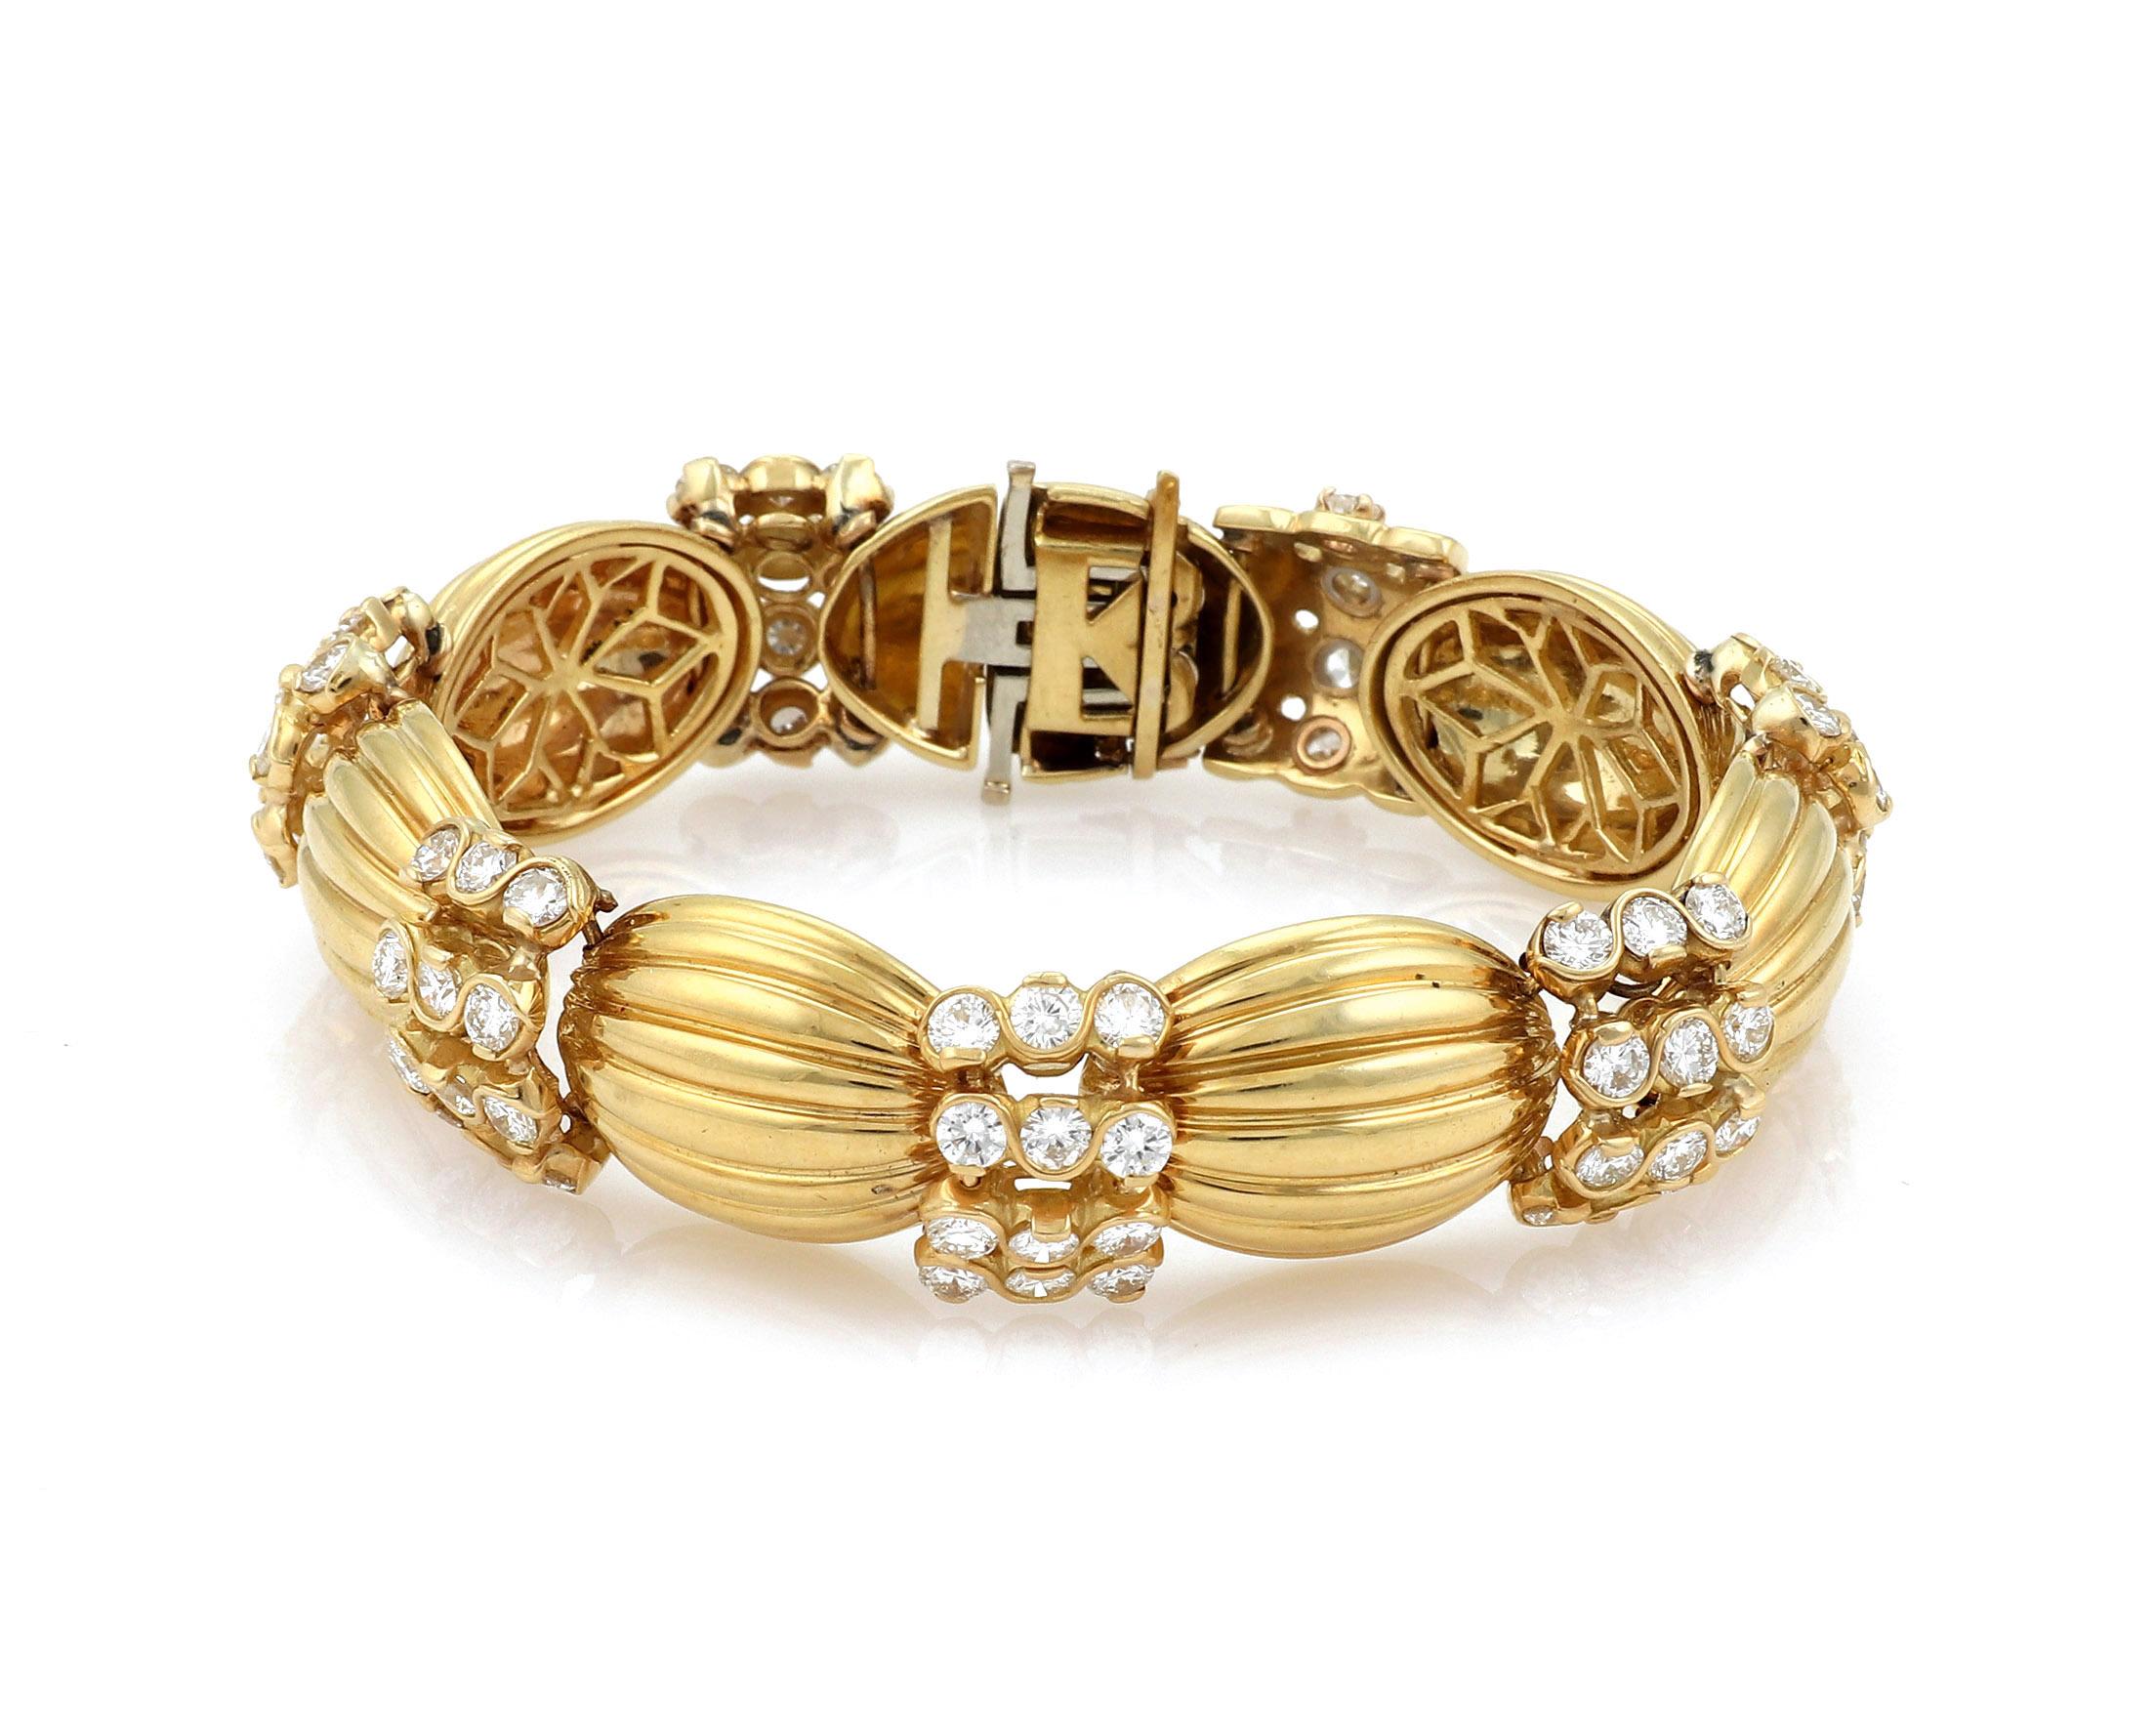 This stunning bracelet is crafted from solid 18k yellow gold with a polished finish and has 7 dome shape fluted links with 12 round cut diamonds mounted in a swirl design frame set between each fluted dome link. The total weight of the diamonds are